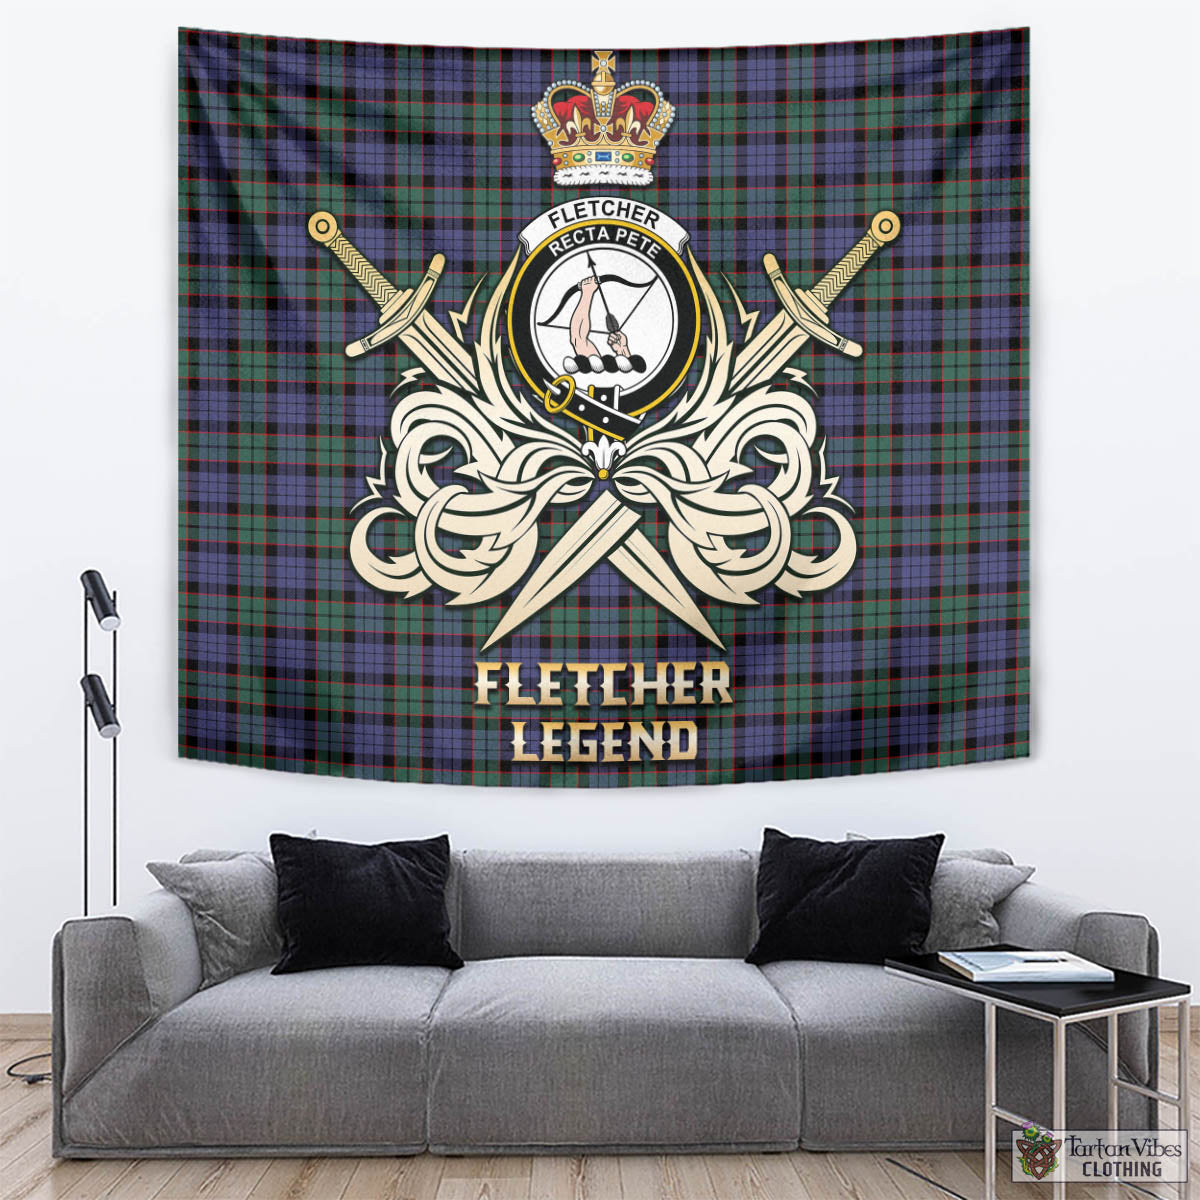 Tartan Vibes Clothing Fletcher Modern Tartan Tapestry with Clan Crest and the Golden Sword of Courageous Legacy